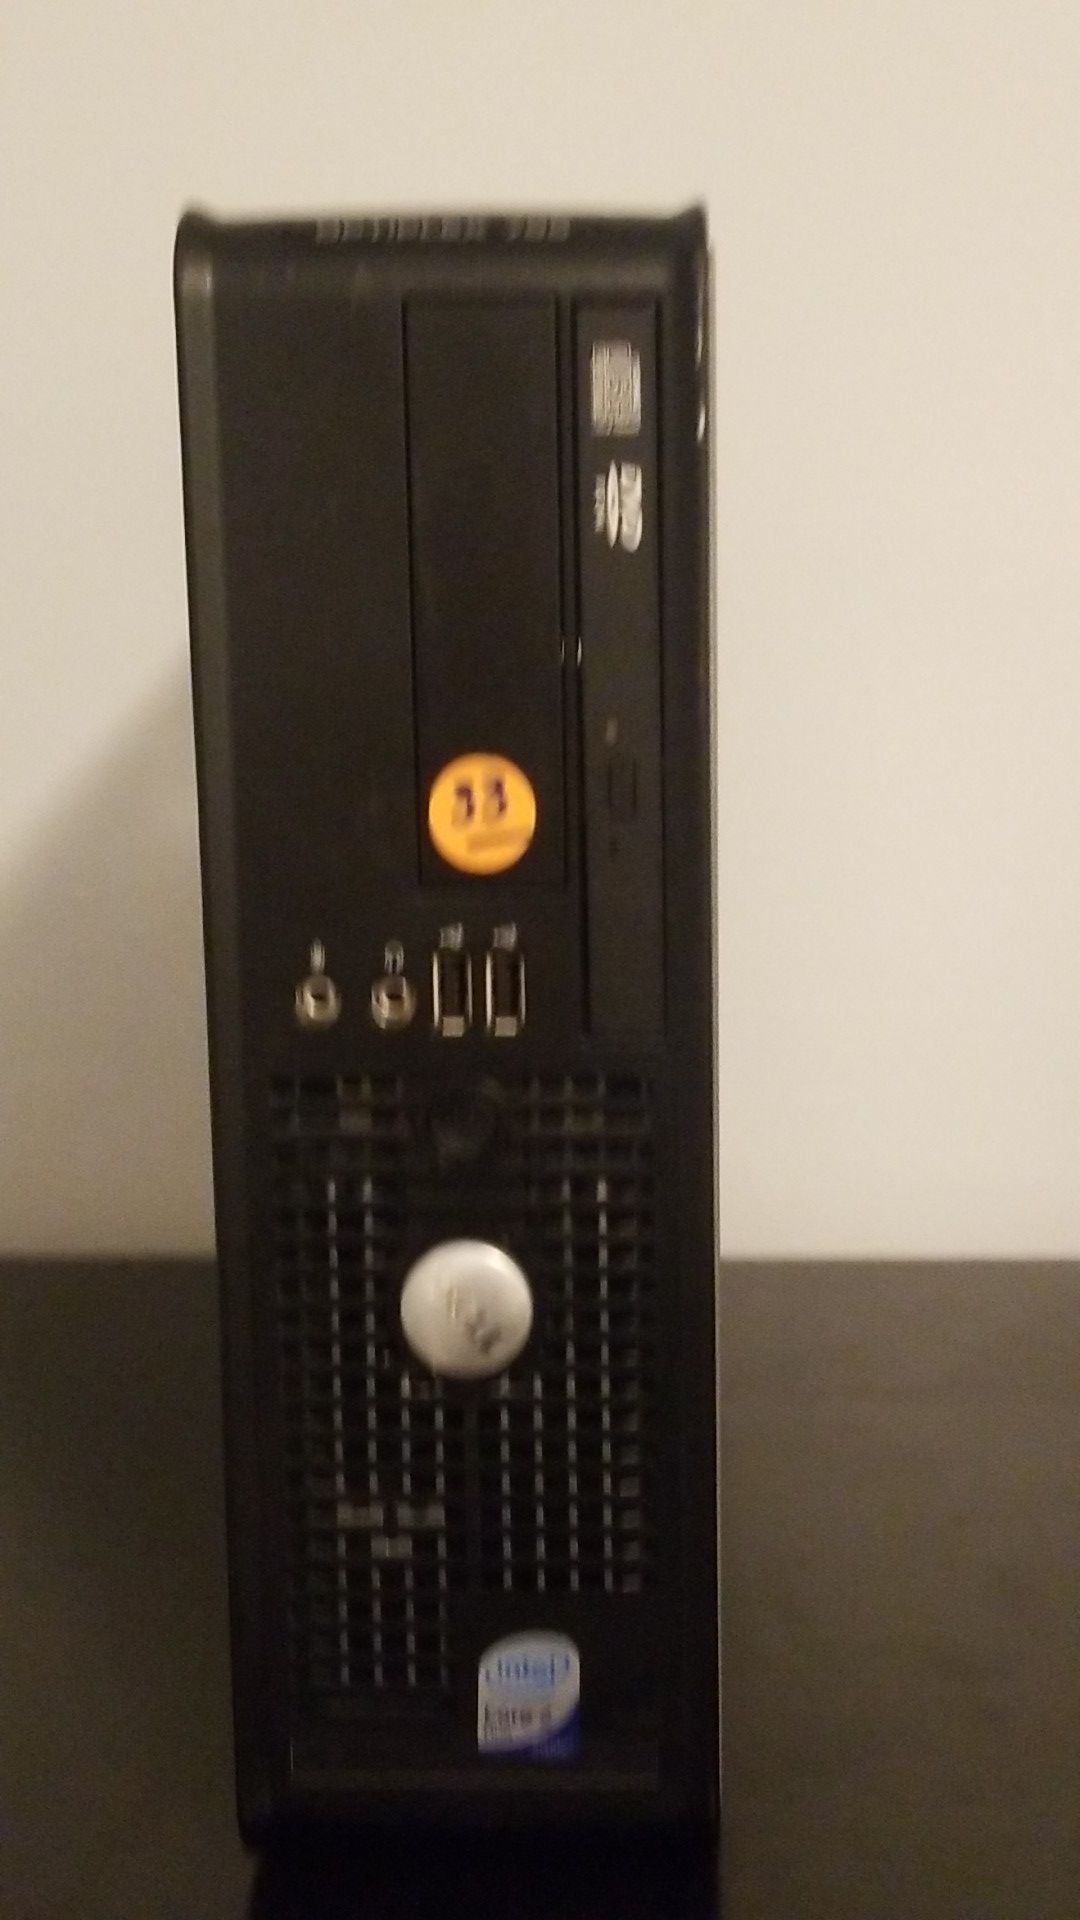 A Dell PC for $80, its brand new never used be for